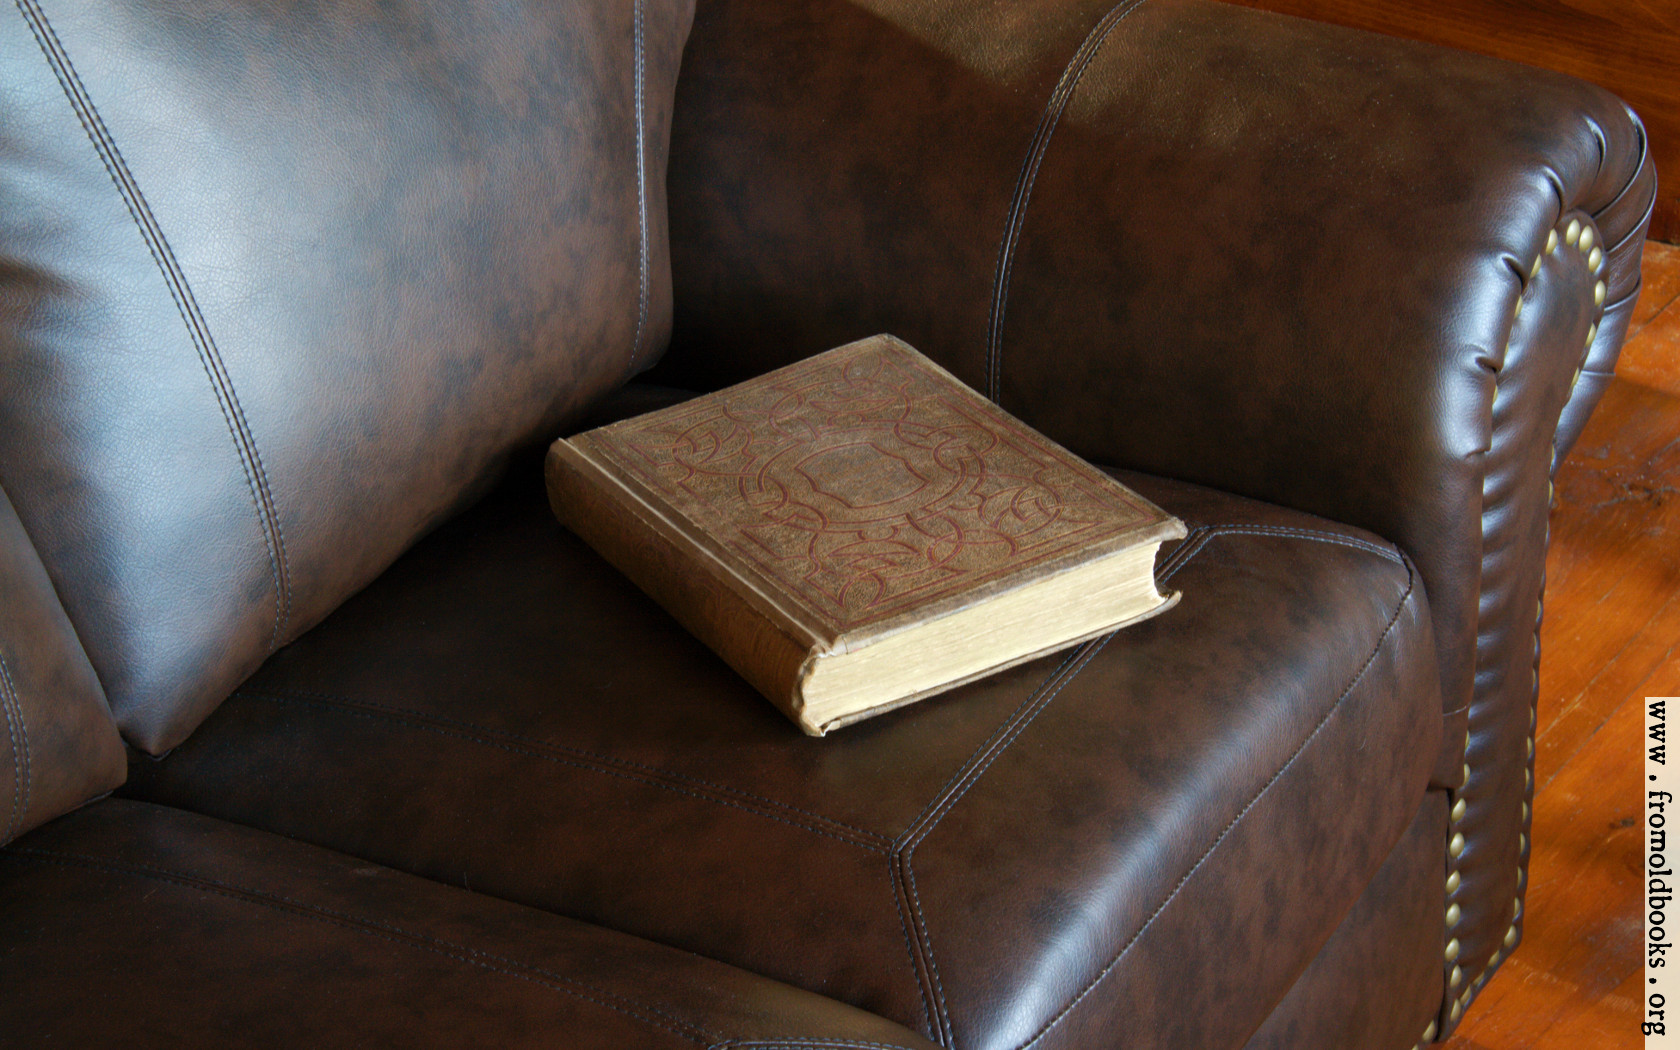 [Picture: Victorian book on leather couch]